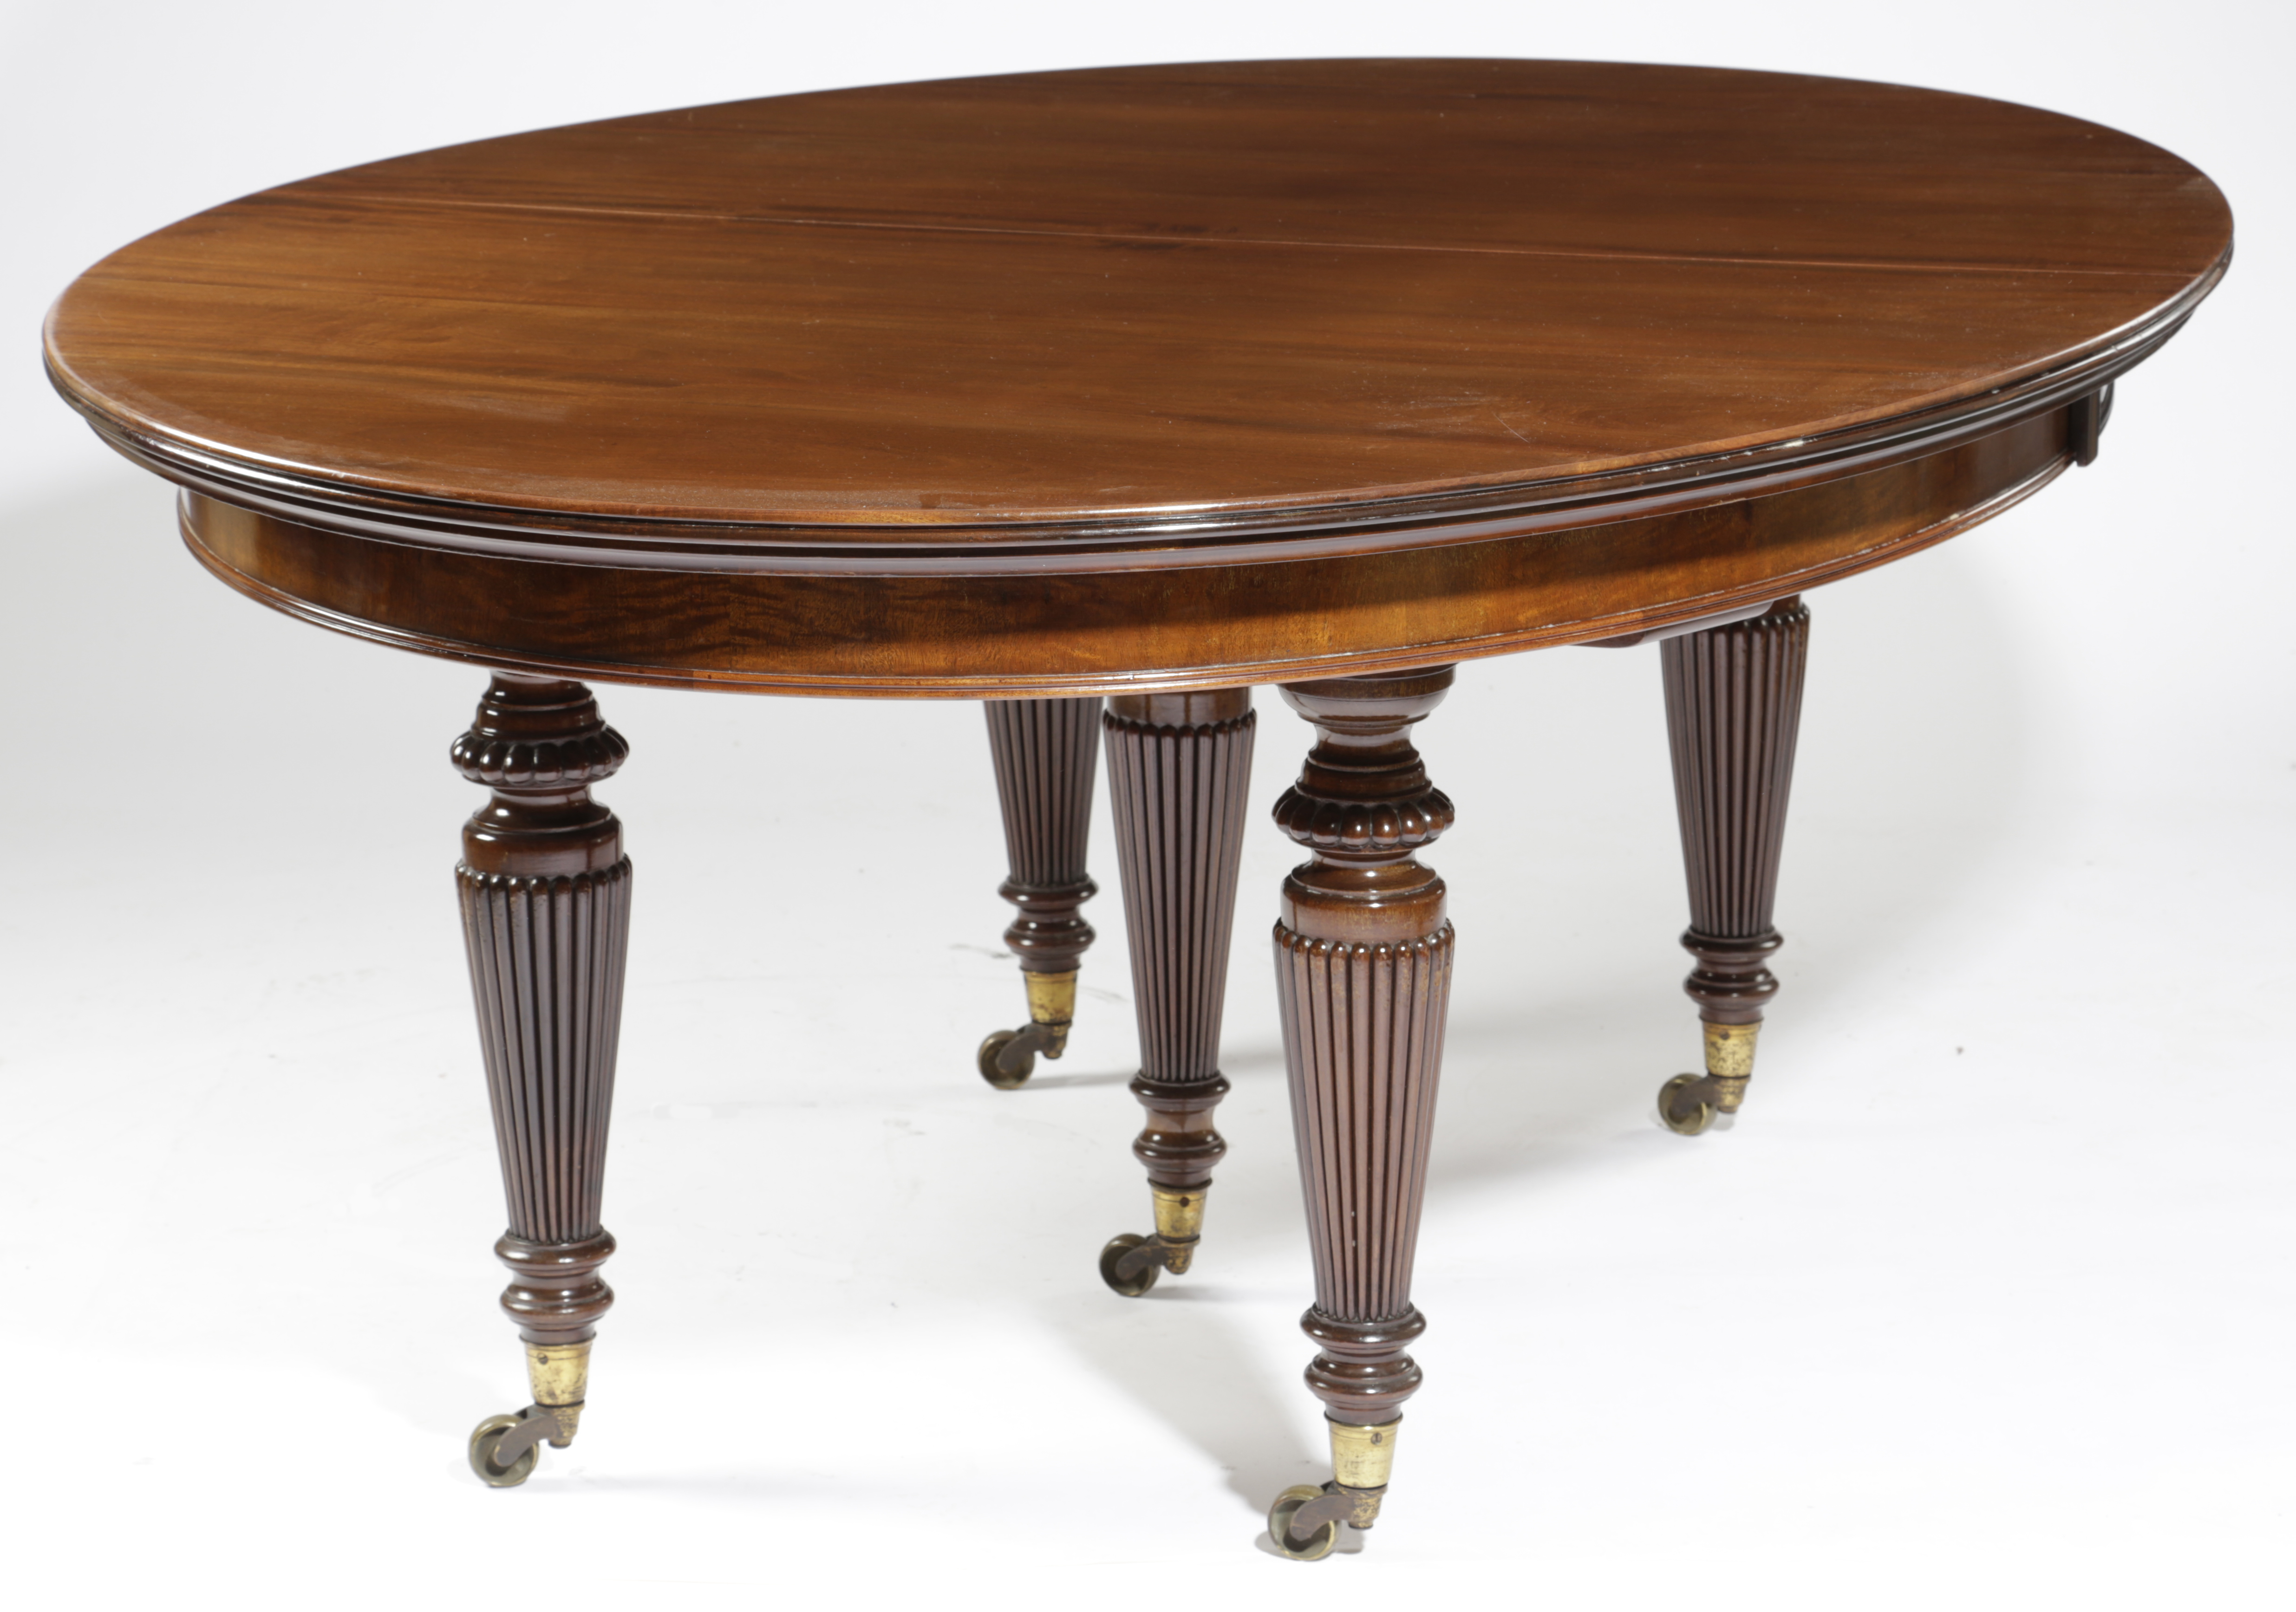 A VICTORIAN MAHOGANY DINING TABLE C.1870-80 the top with a reeded edge with rounded ends extending - Image 2 of 3